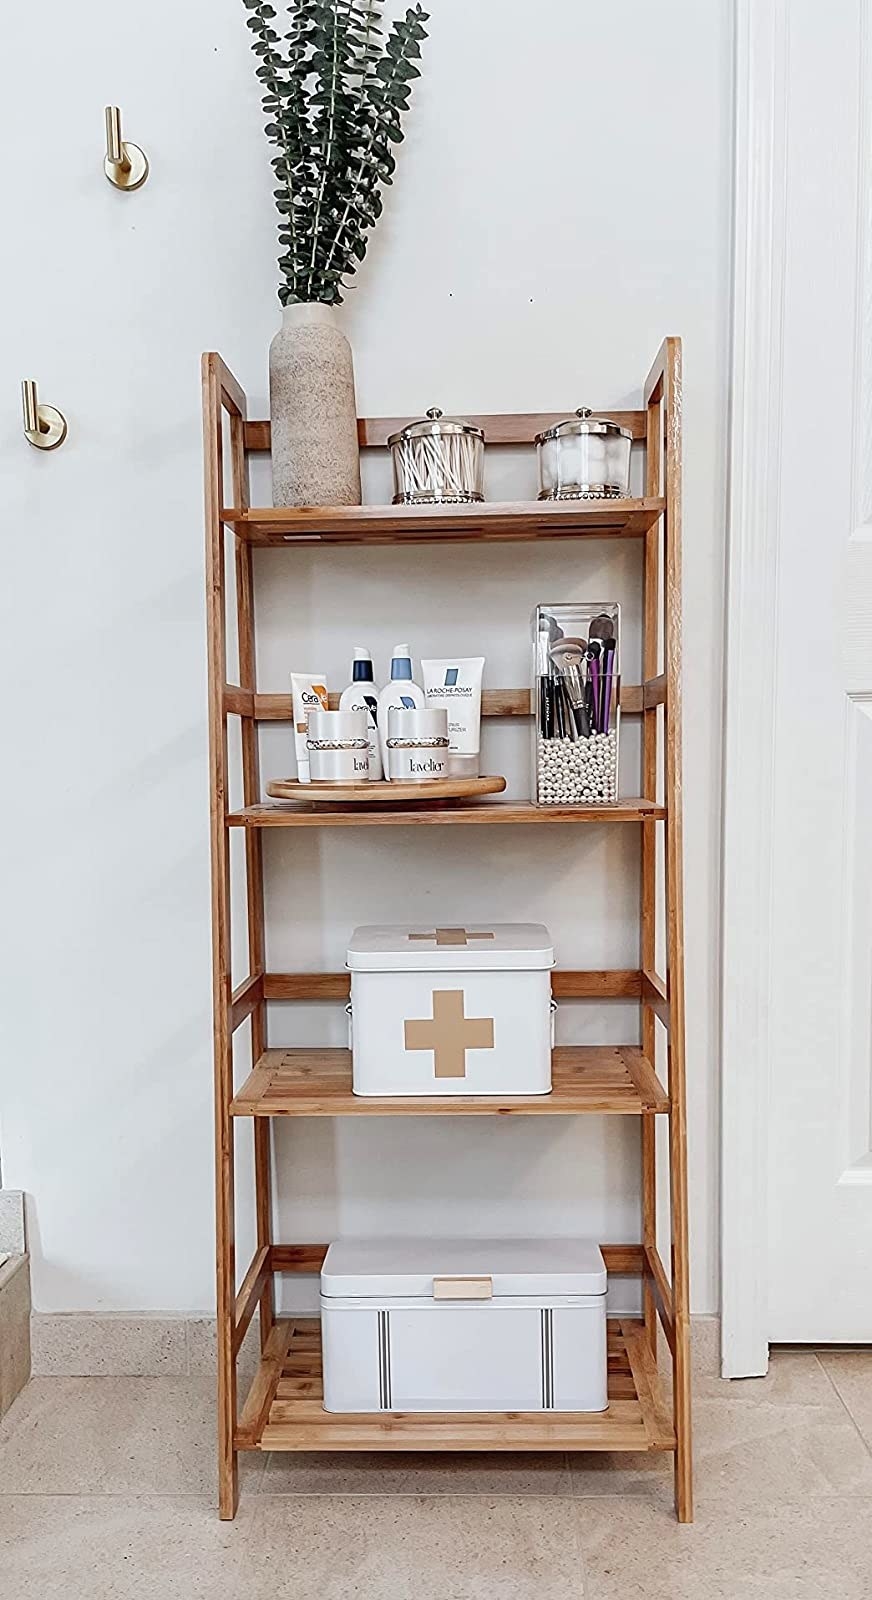 A bamboo shelf with various storage boxes and self-care products